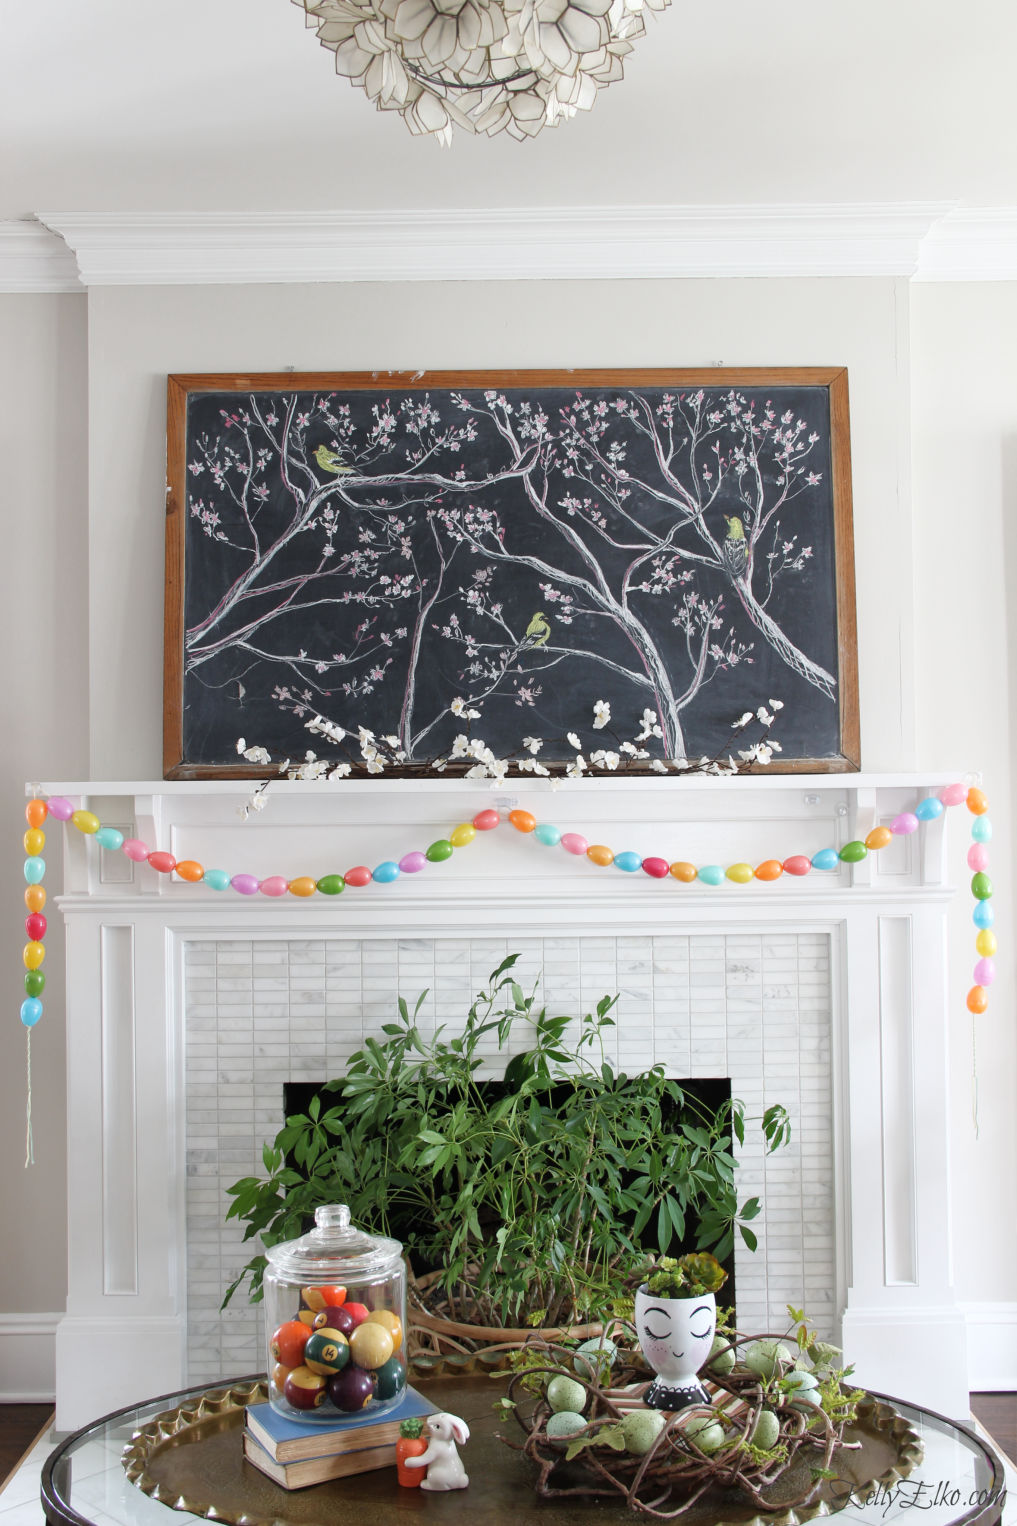 Free Spring Chalkboard Printable - she turned this original chalk art into a free printable and I love the pink and white magnolia leaves and trio of yellow birds kellyelko.com #chalkboard #chalkart #chalkboardprintable #springprintable #freeprintable #printables #art #freeart #springdecor #mantel #springmantel #livingroomdecor 